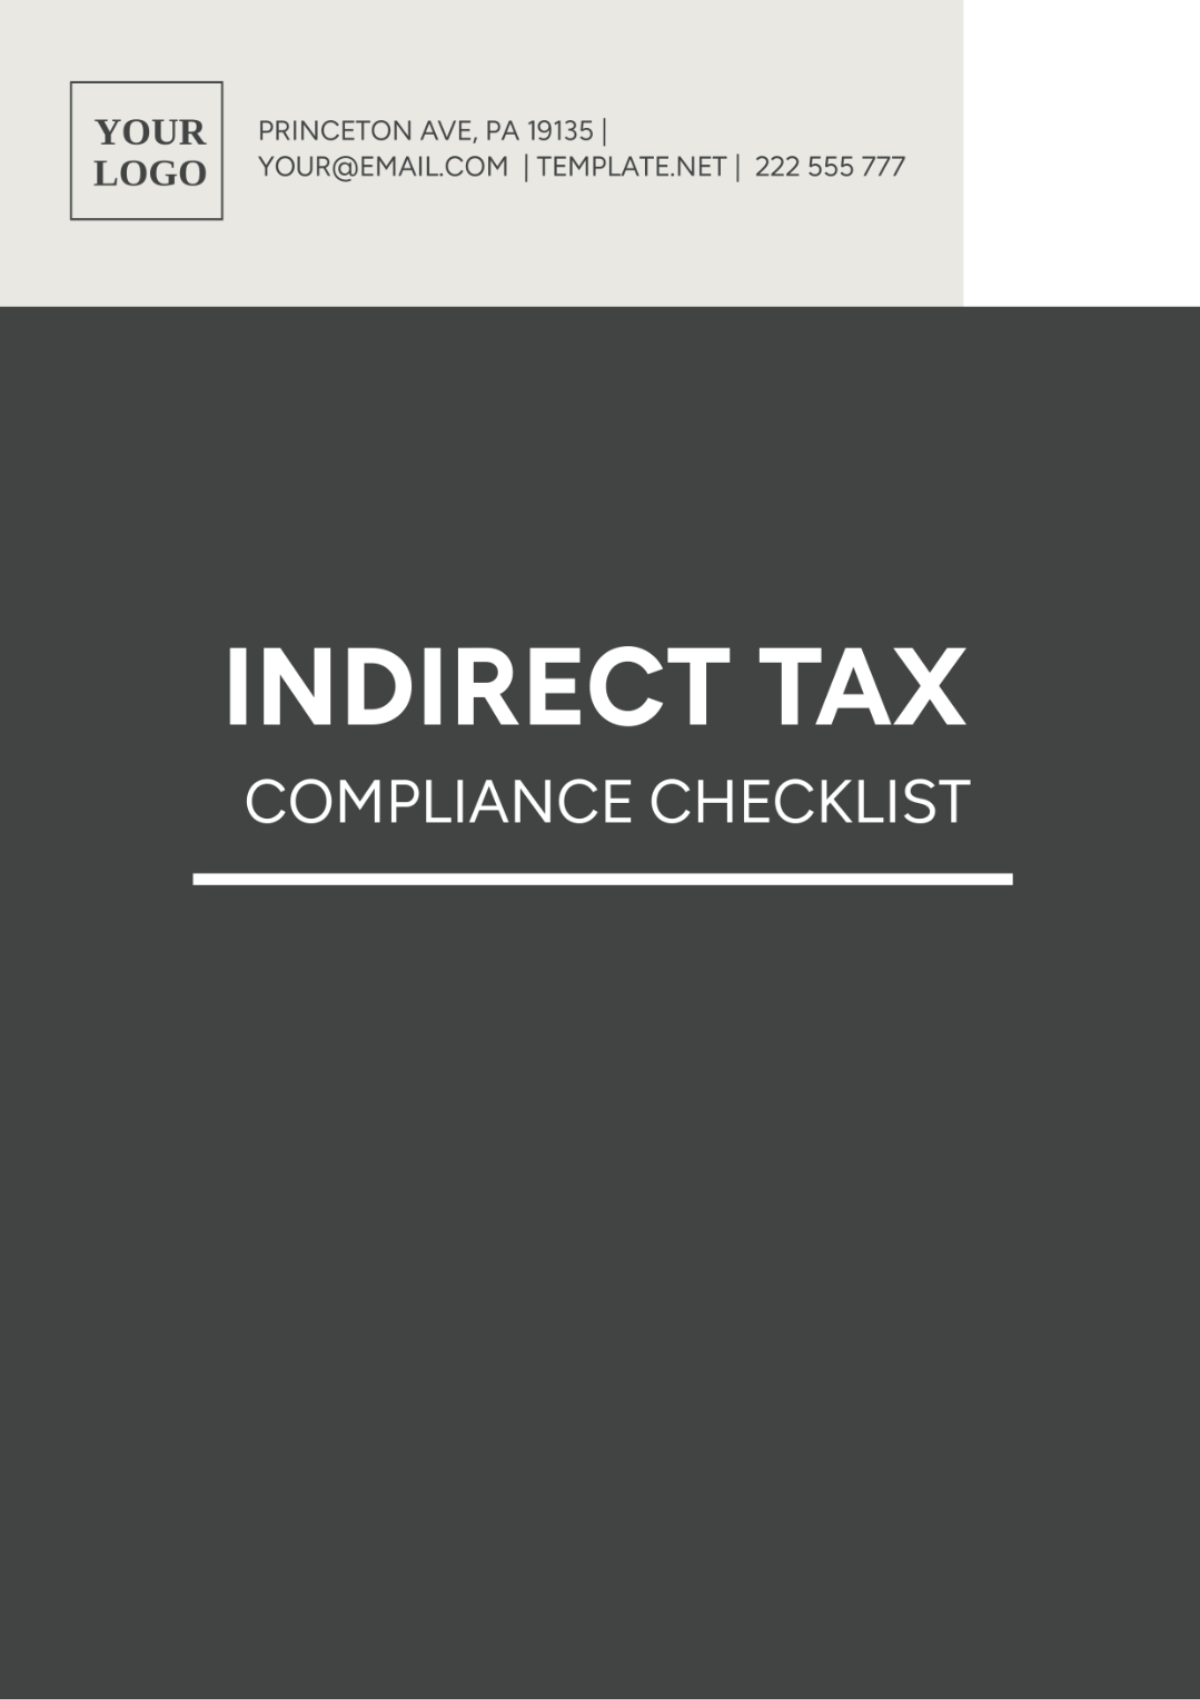 Indirect Tax Compliance Checklist Template